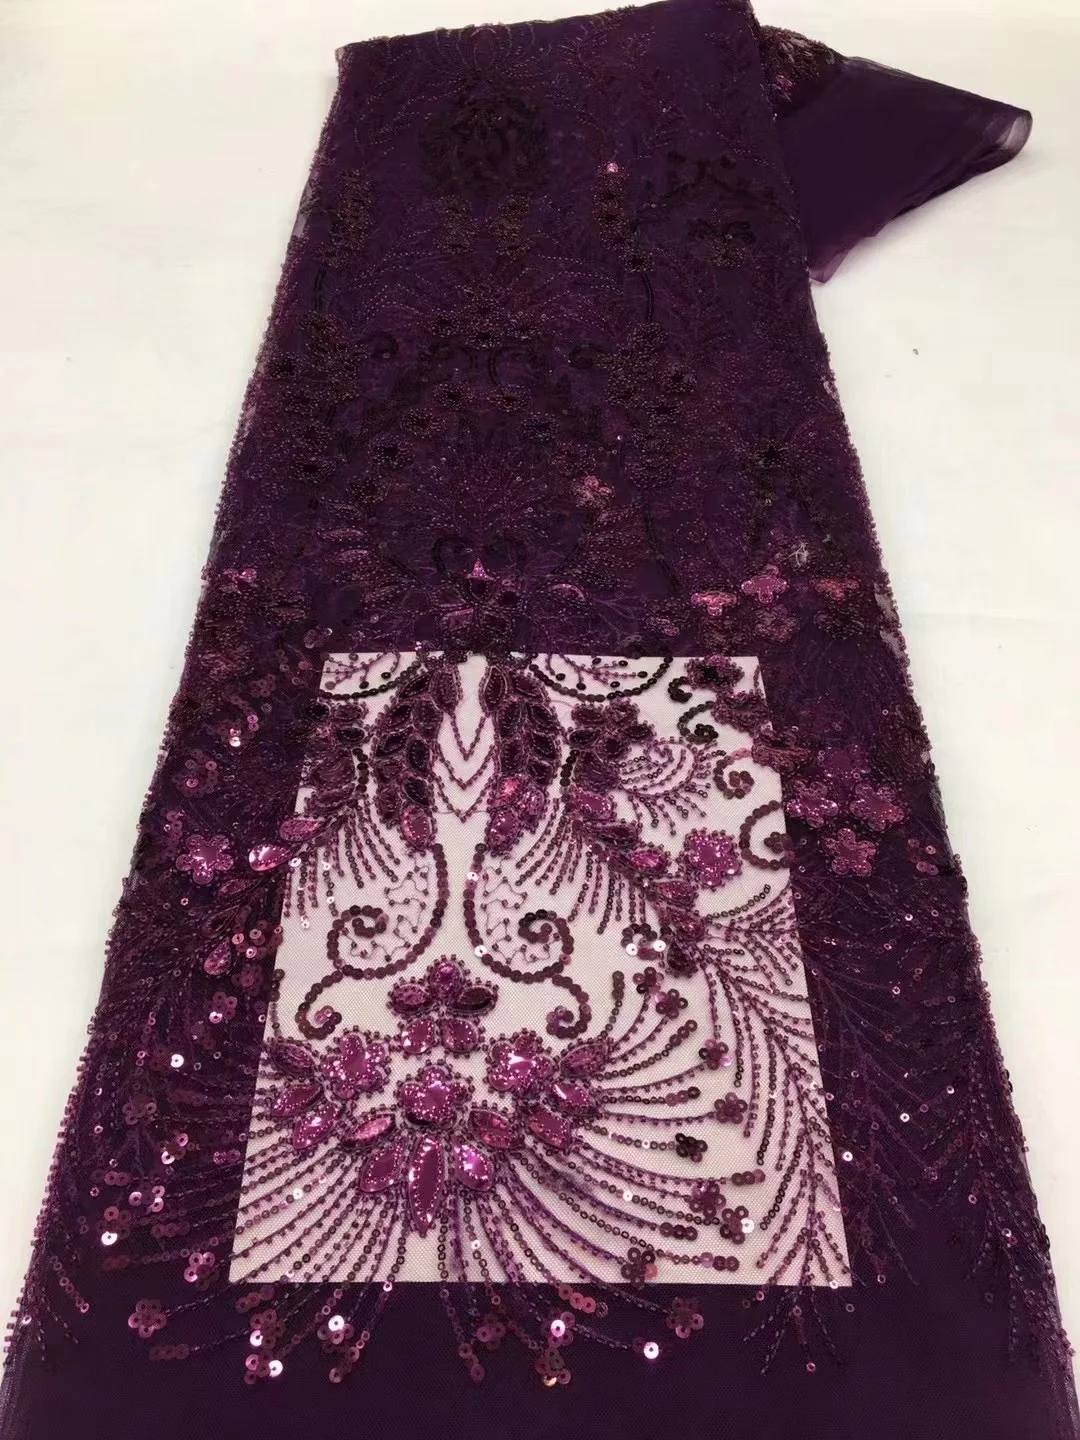 

Purple African Handmade Beads Laces Fabrics Luxury Nigerian Sequins Embroider Mesh Lace Fabric for Party Dress